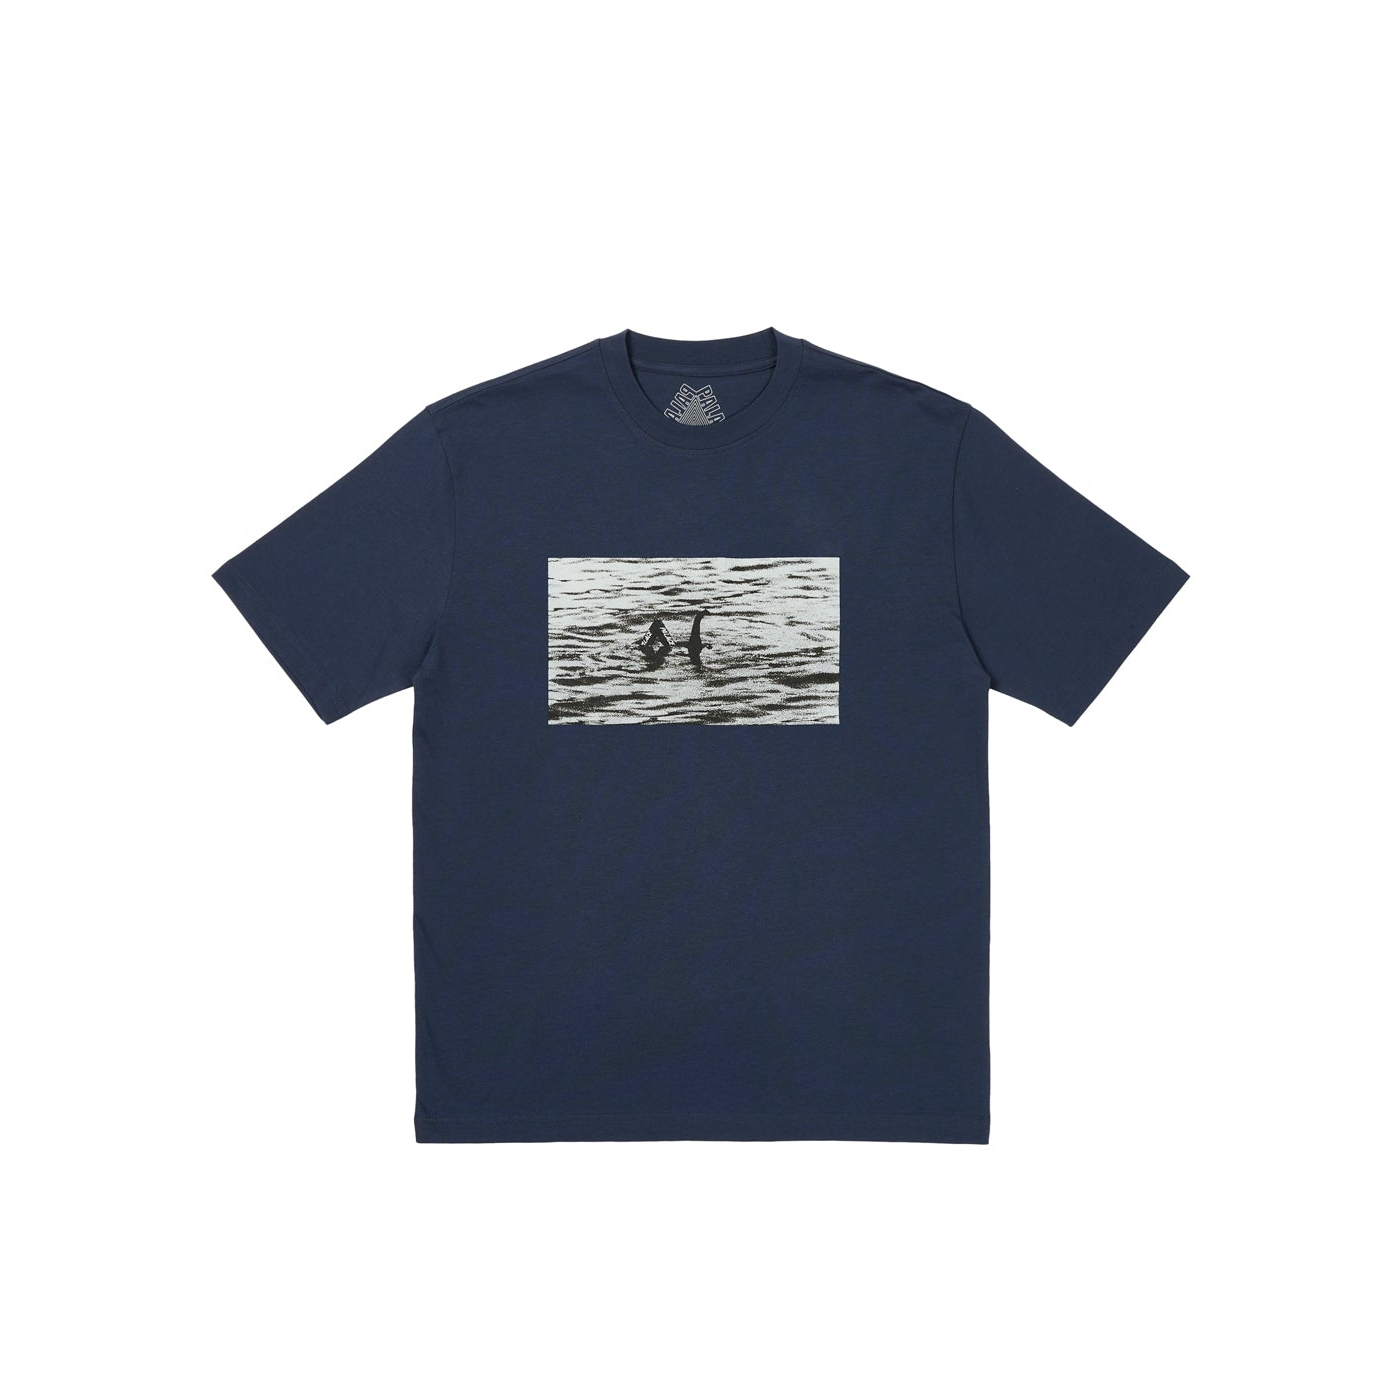 Thumbnail NESSIE T-SHIRT NAVY one color